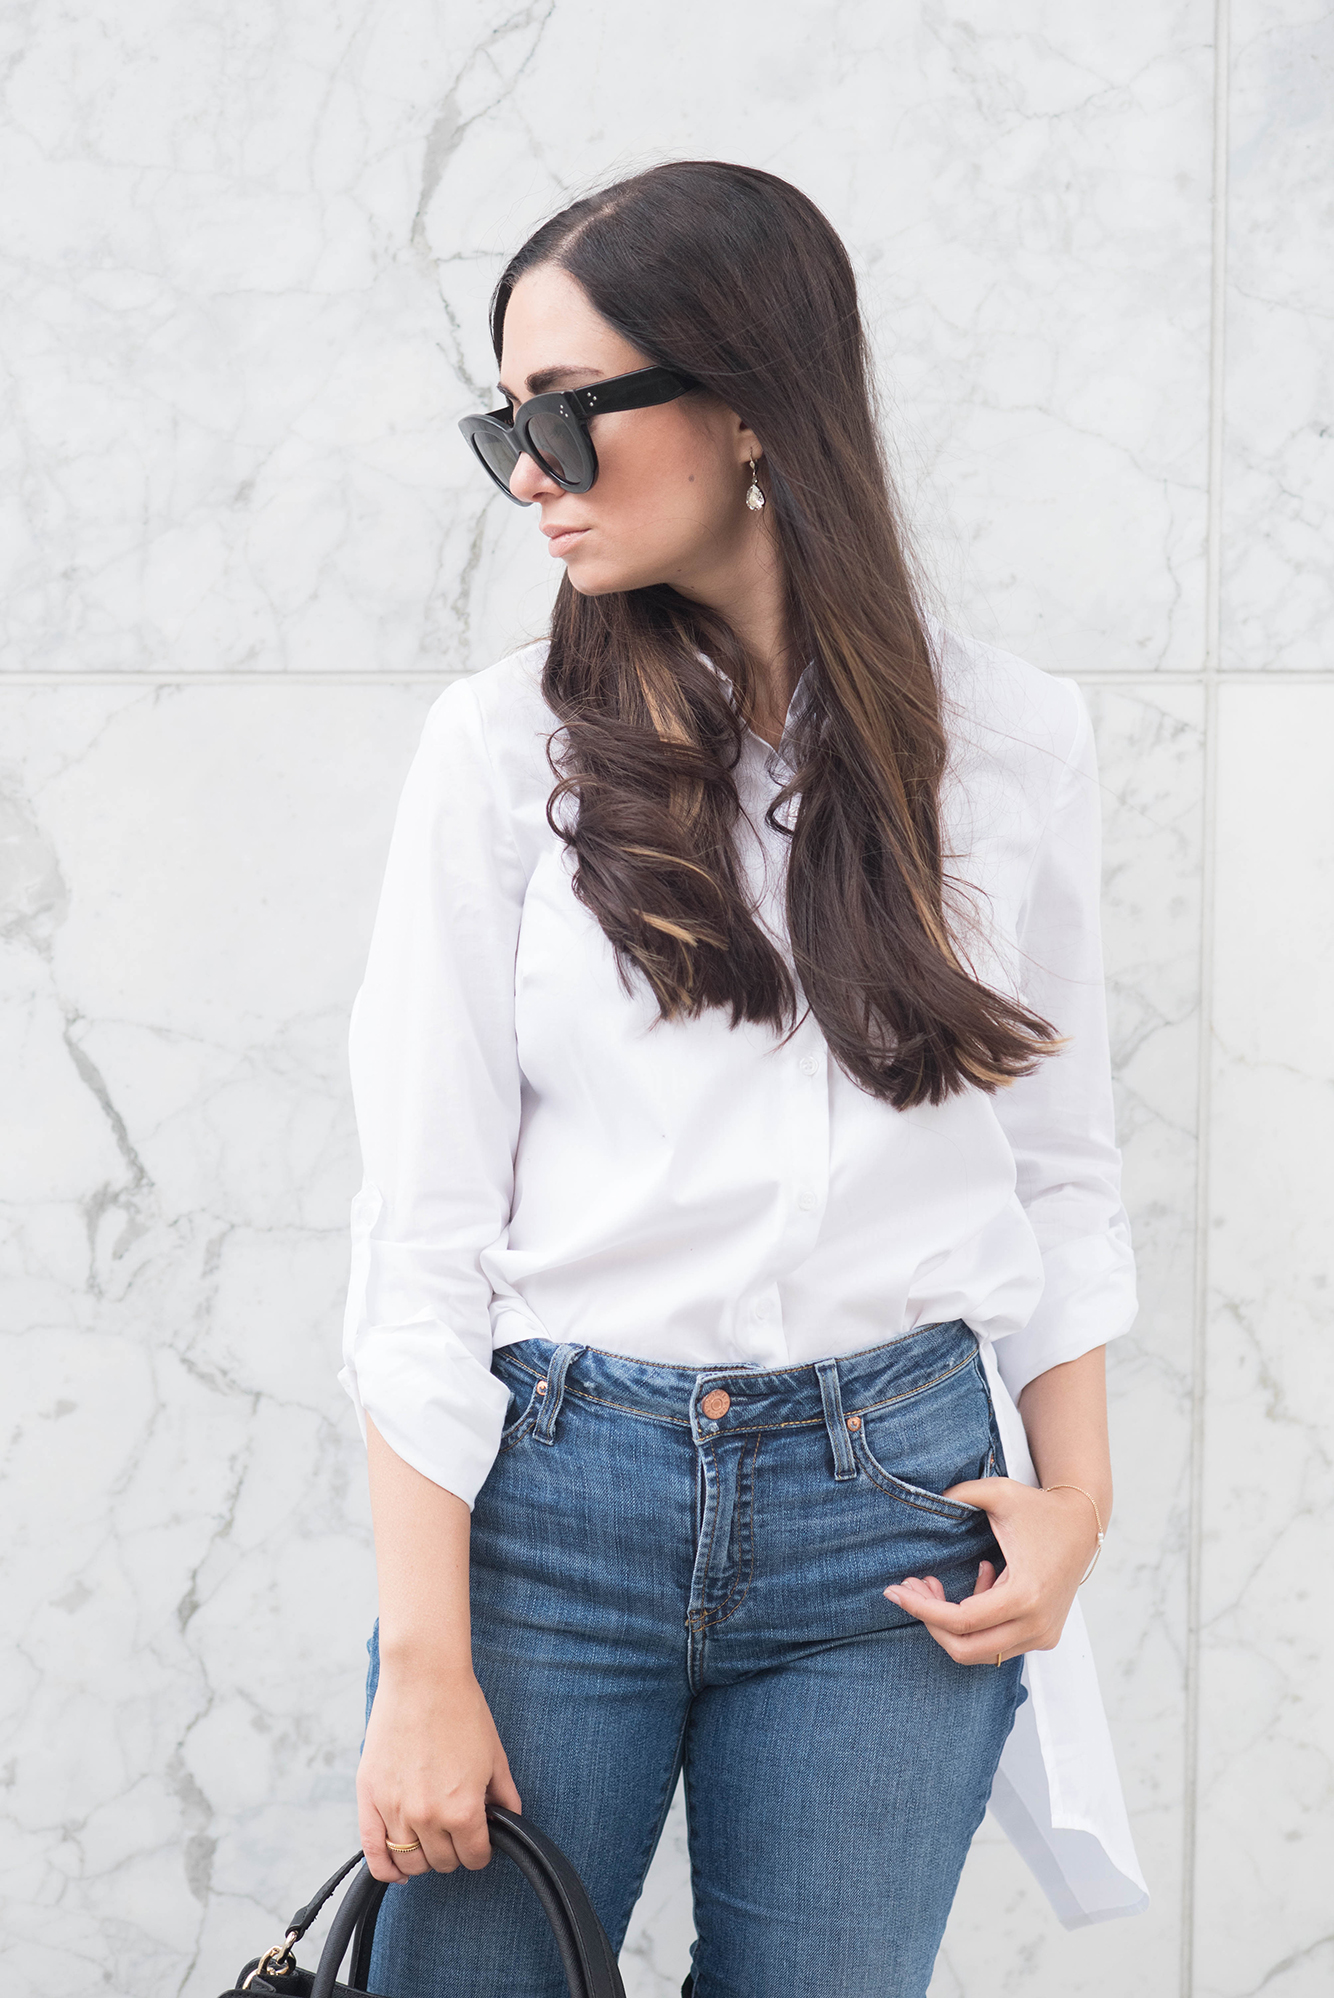 coco-and-vera-top-vancouver-fashion-blog-top-canadian-fashion-blog-top-blogger-portrait-cee-fardoe-brunette-celine-audrey-sunglasses-marled-by-reunited-clothing-blouse